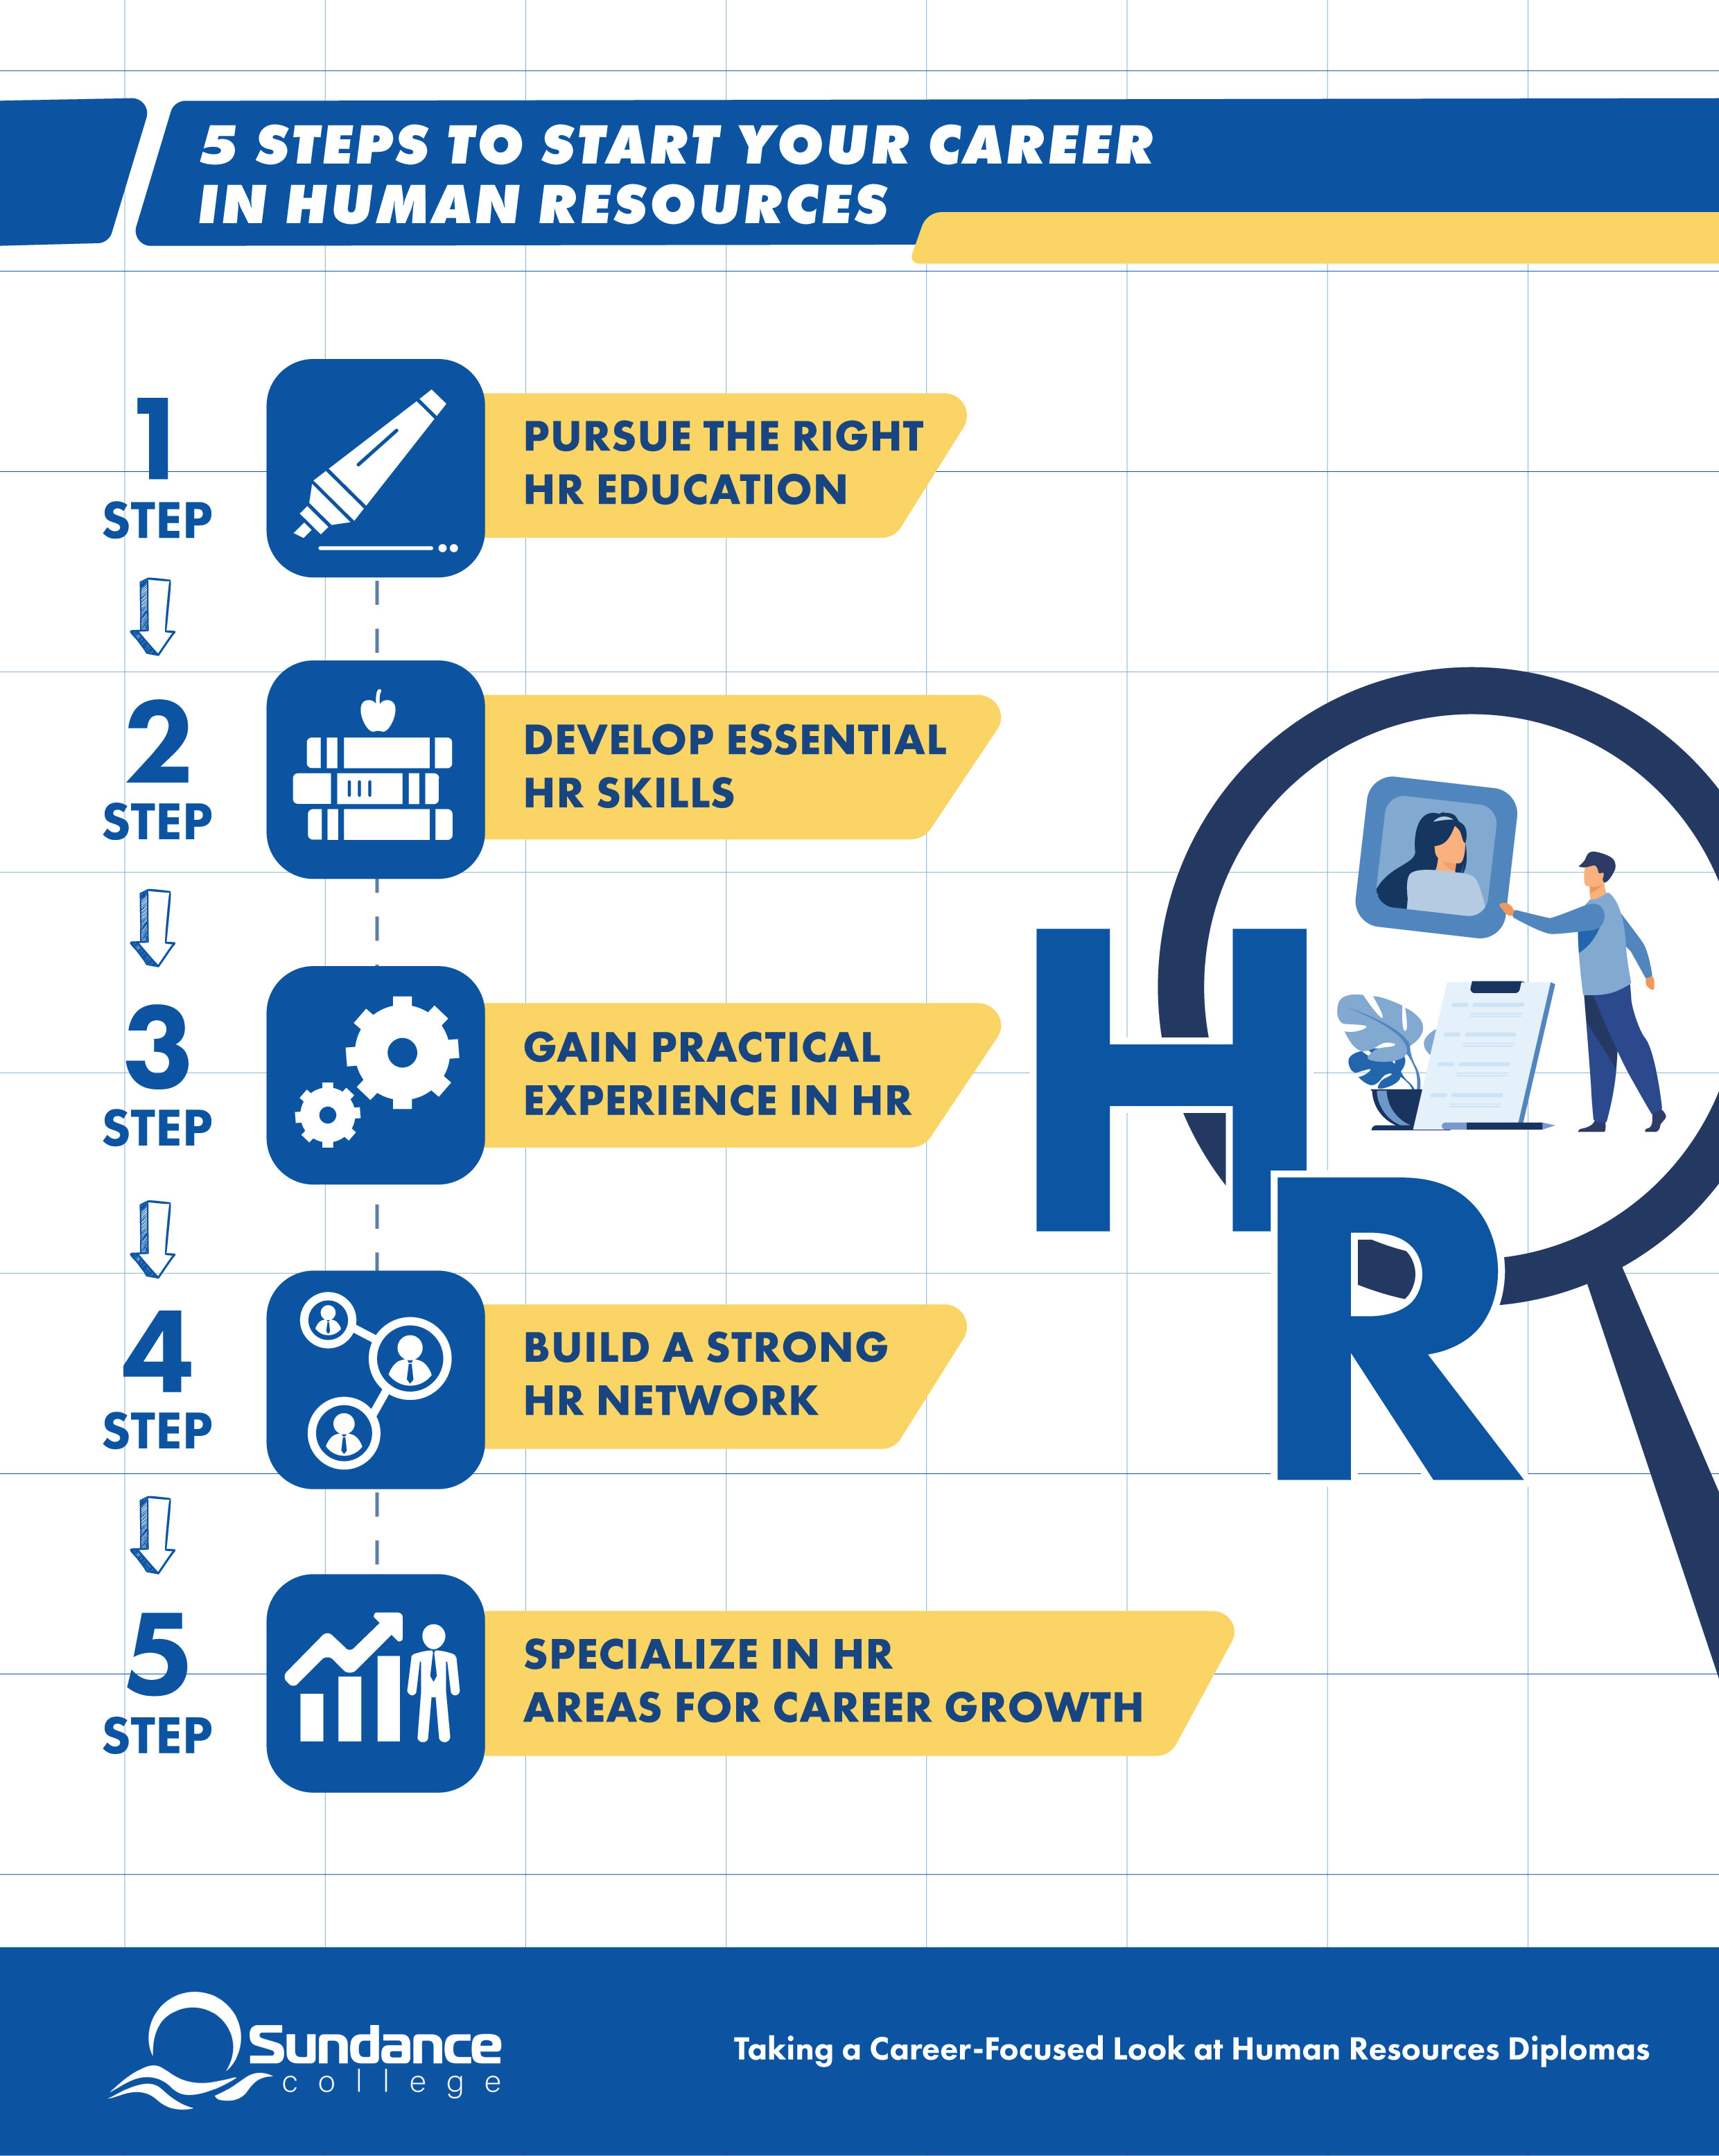 An infographic made by Sundance College about five steps to start your career in Human Resources including step 1-Pursue the right HR education; step 2- Develop essential HR skills; step 3- gain practical experience in HR; step 4- Build a strong HR network; step 5 - Specialize in HR areas for career growth.